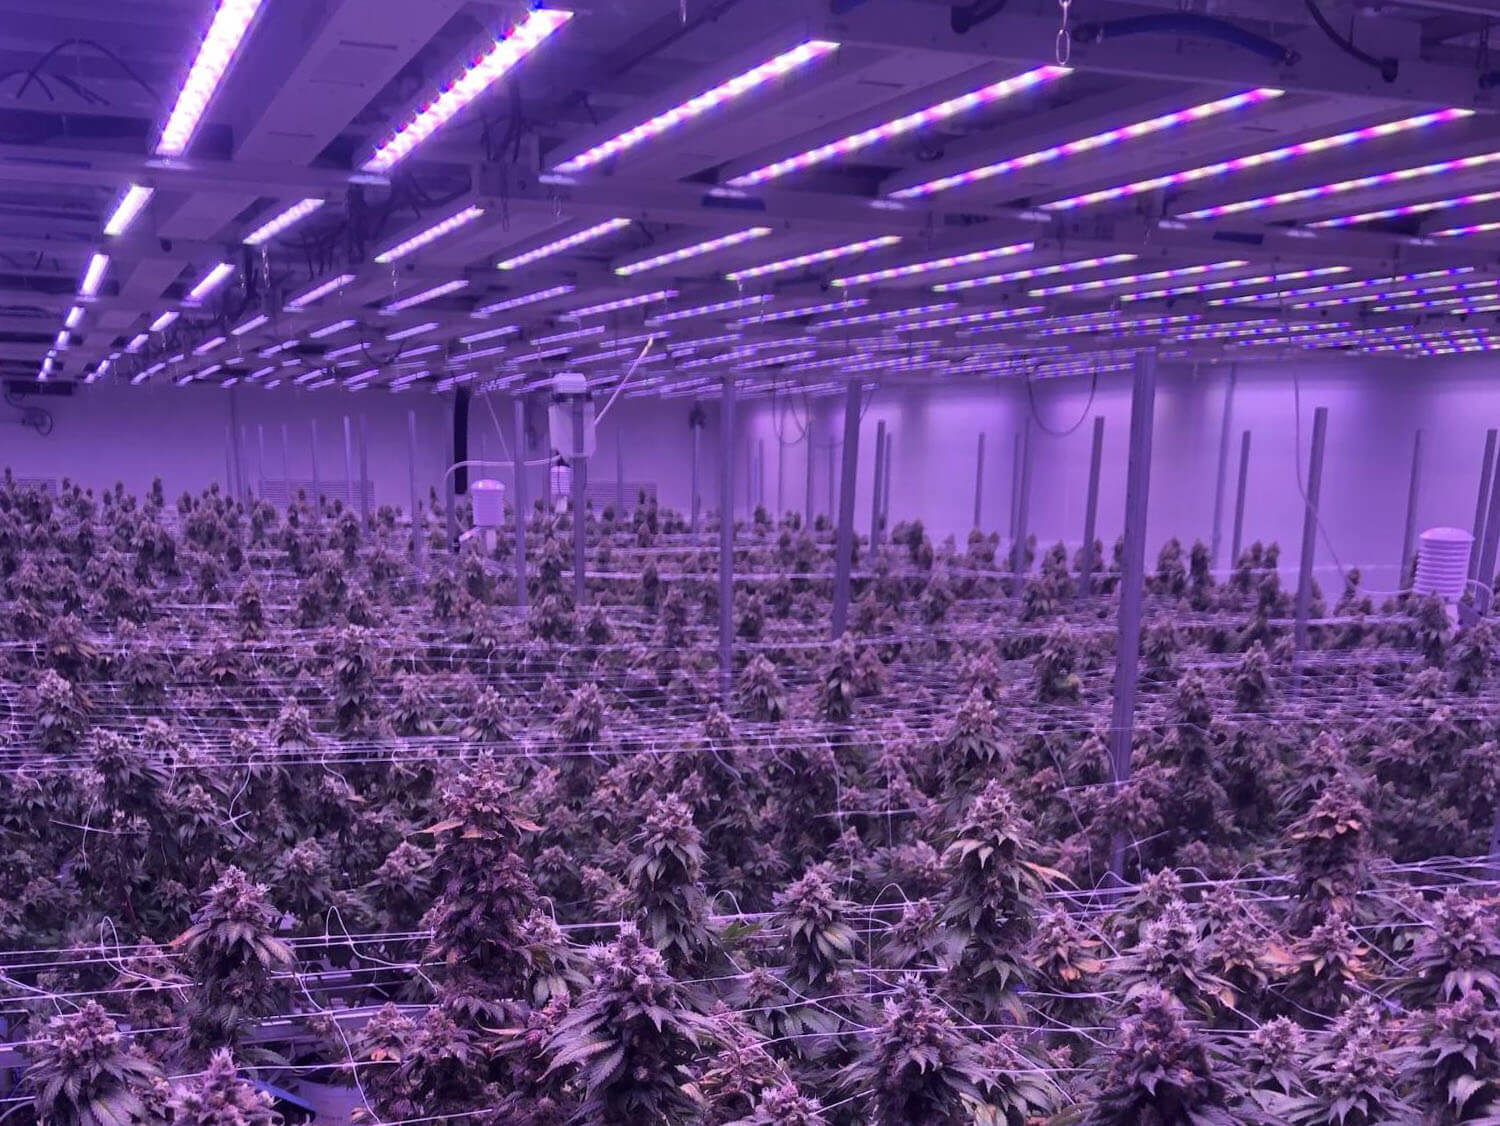 Study of Cannabis Energy Use Shows Indoor Cultivation Operations Using LED Lighting Demonstrate Better Efficiency